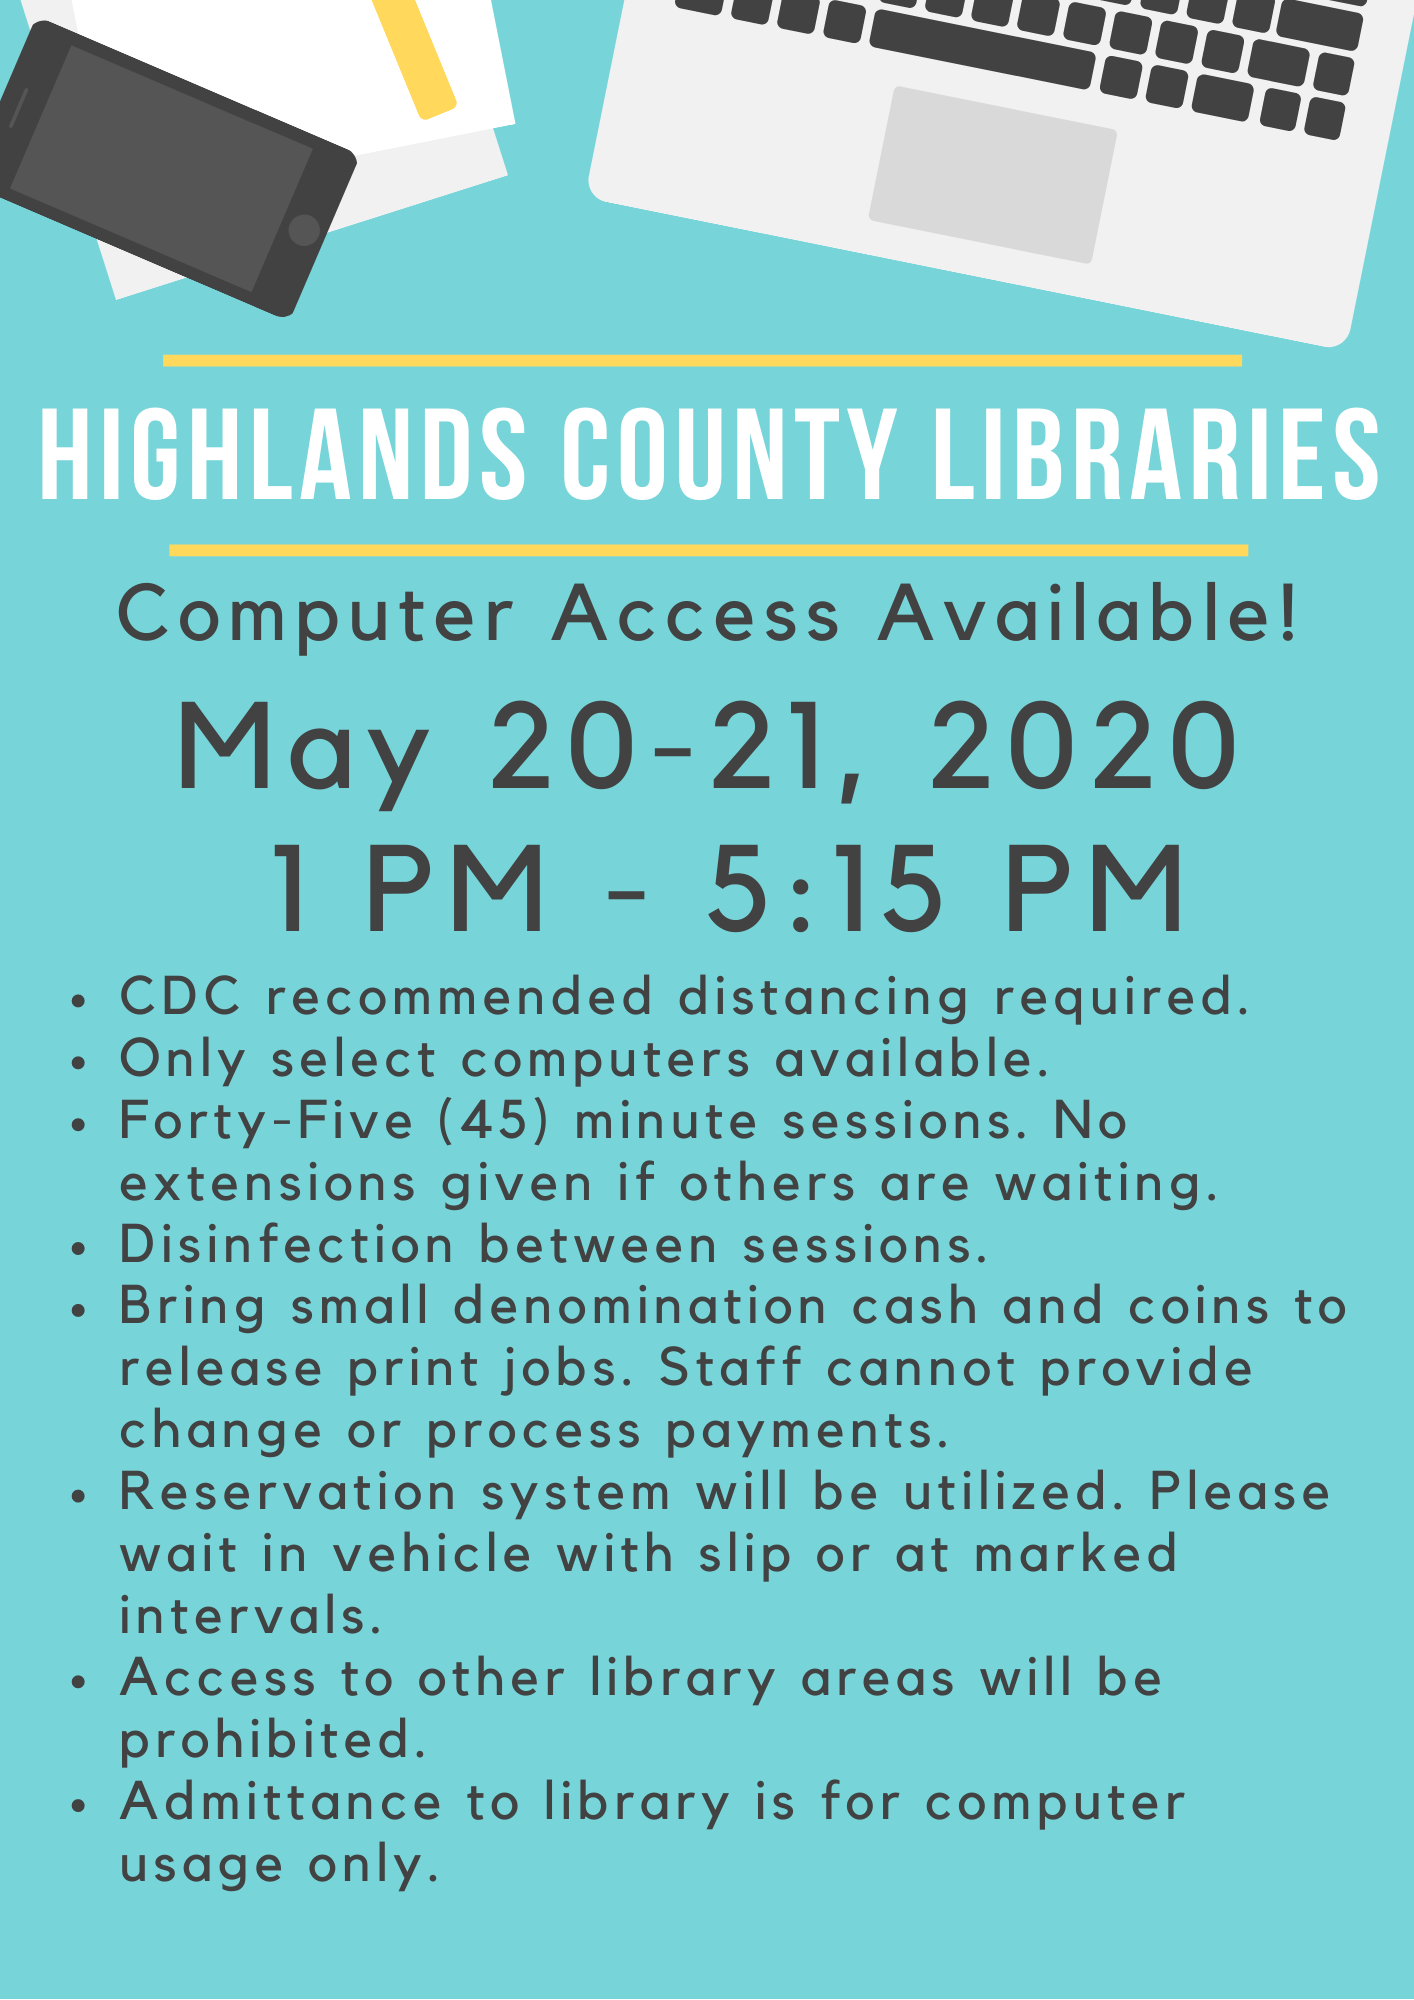 Highlands County Public Libraries will be offering computer usage on May 20-21, 2020 from 1:00 PM to 5:15 PM. Computers will automatically log off at 5:15 PM. Sessions will be limited to 45 minutes. Social distancing lines will be marked on the sidewalk if you choose to wait there, and if not please wait in your vehicle with a reservation slip. All other areas of the libraries will be closed and not available for use or access. Computer service available at Avon Park, Sebring, and Lake Placid Libraries. Please call 863-402-6716 for questions or assistance.